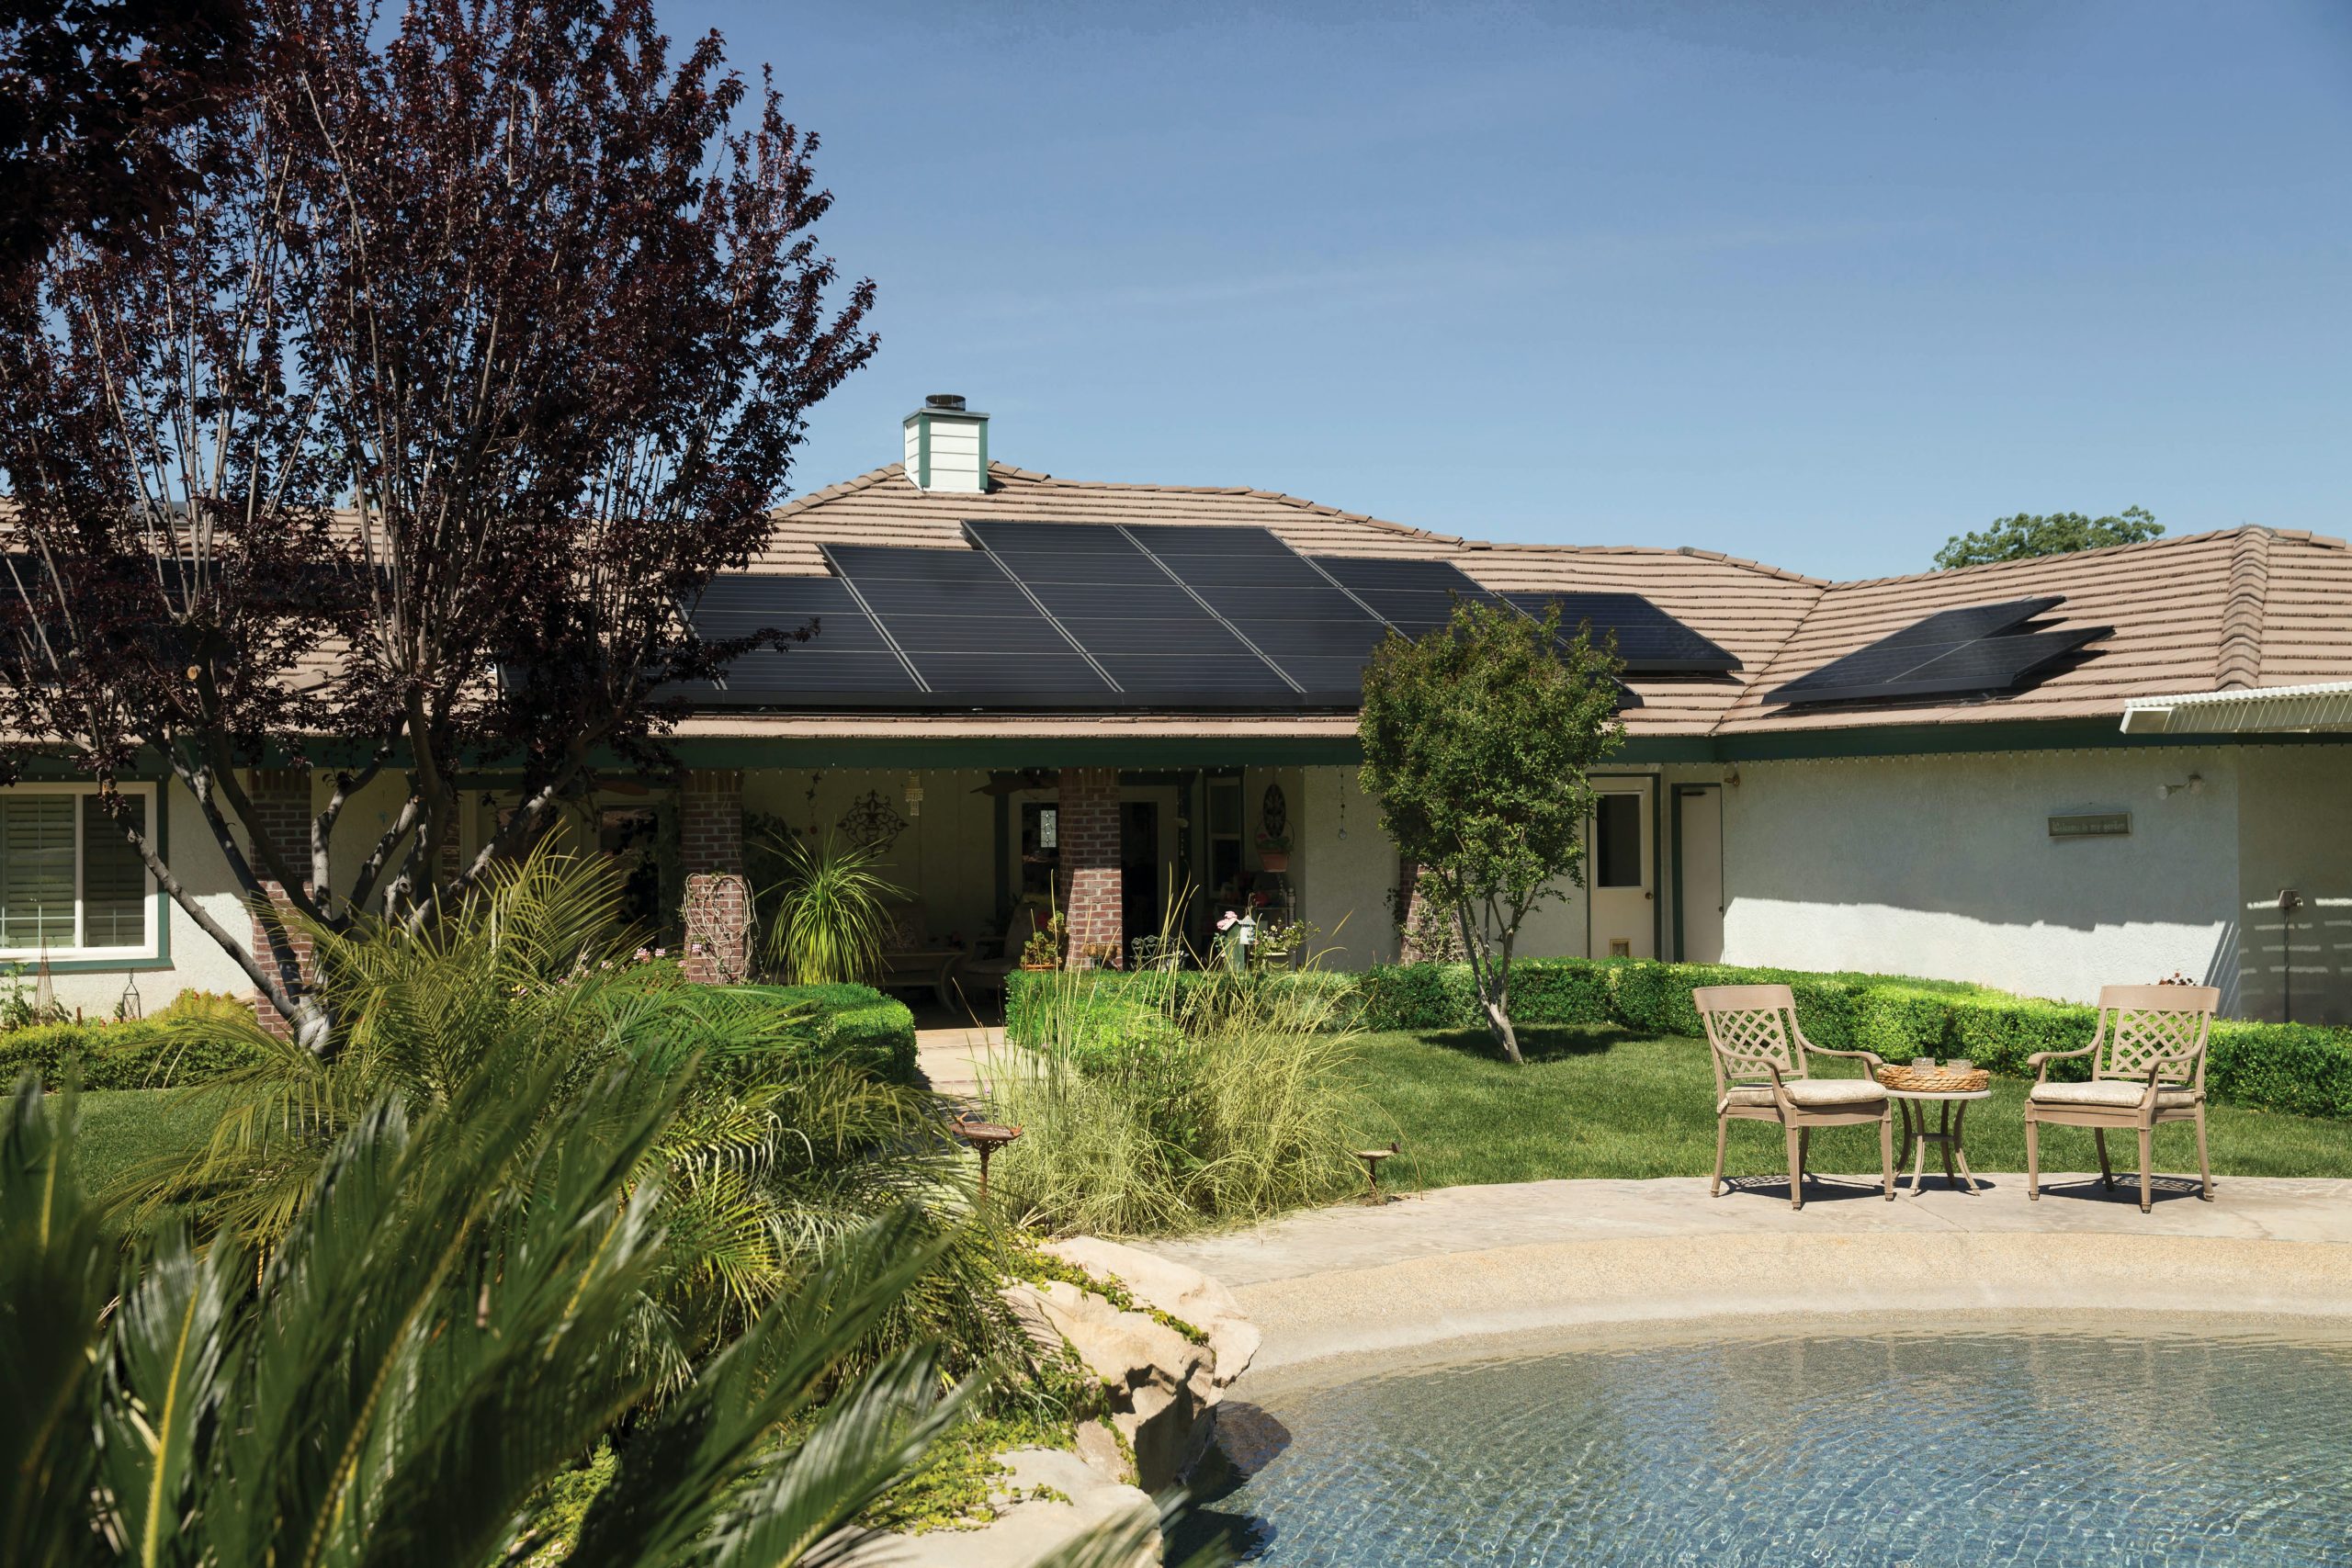 A beautiful home with a residential solar system